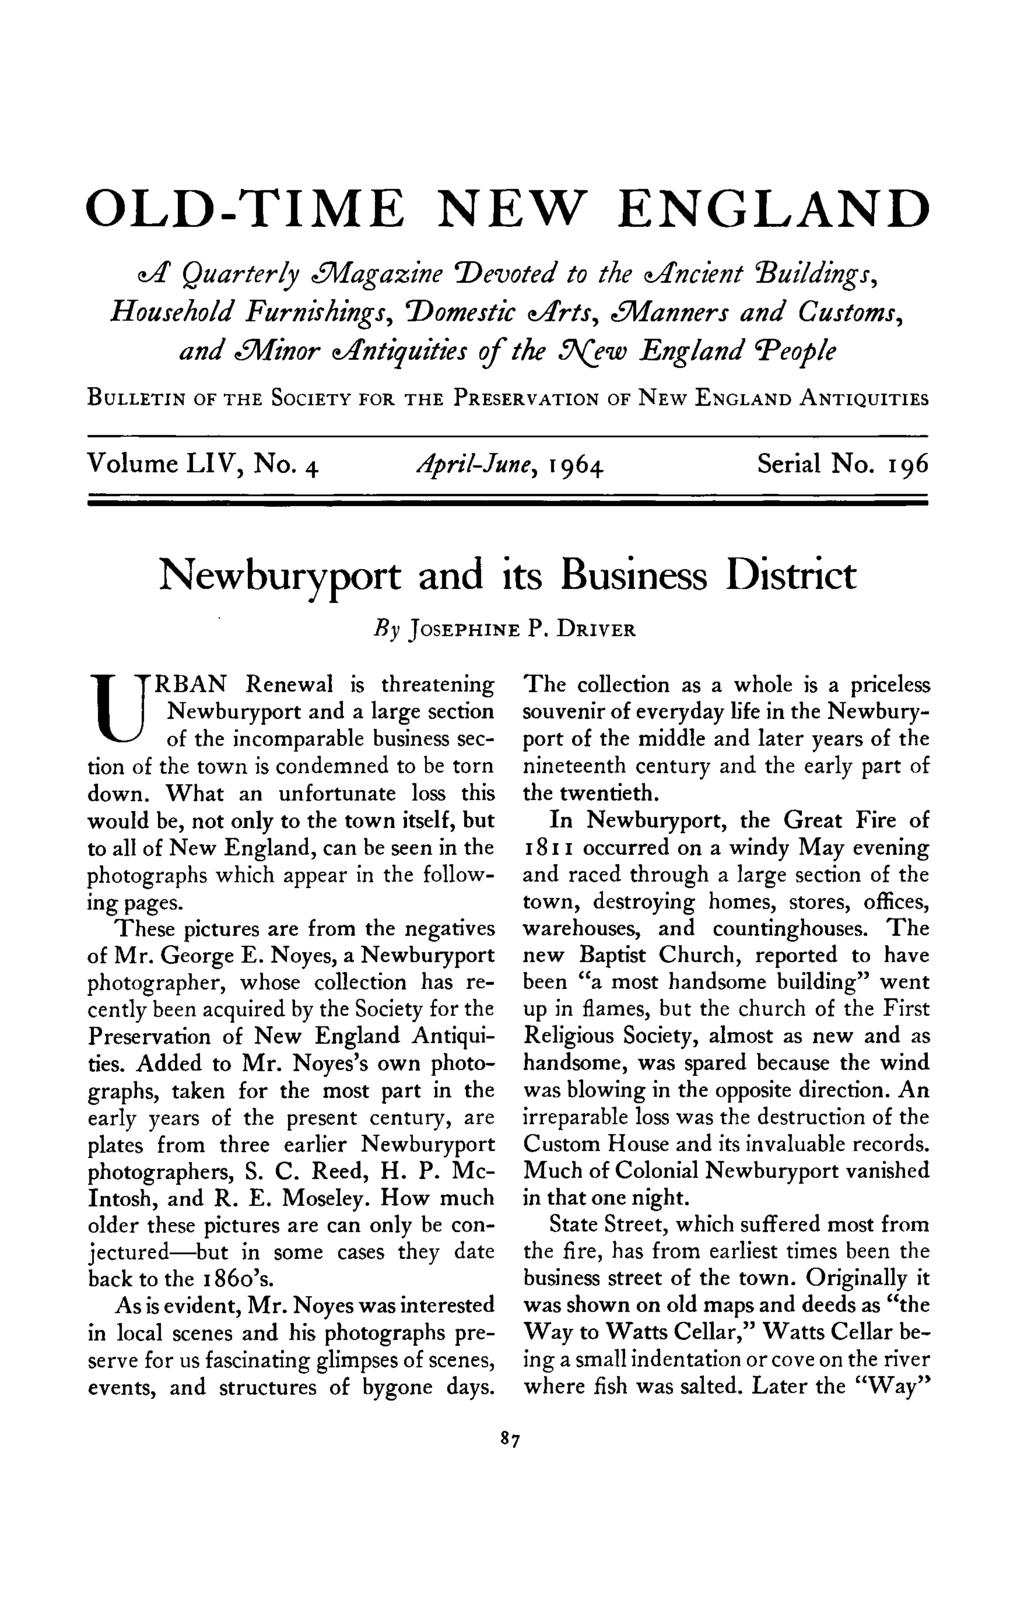 OLD-TIME NEW ENGLAND d Quarterly &Vagaxine Devoted to tiie dncient Buildings, Household Furnishings, Domestic A-ts, &?